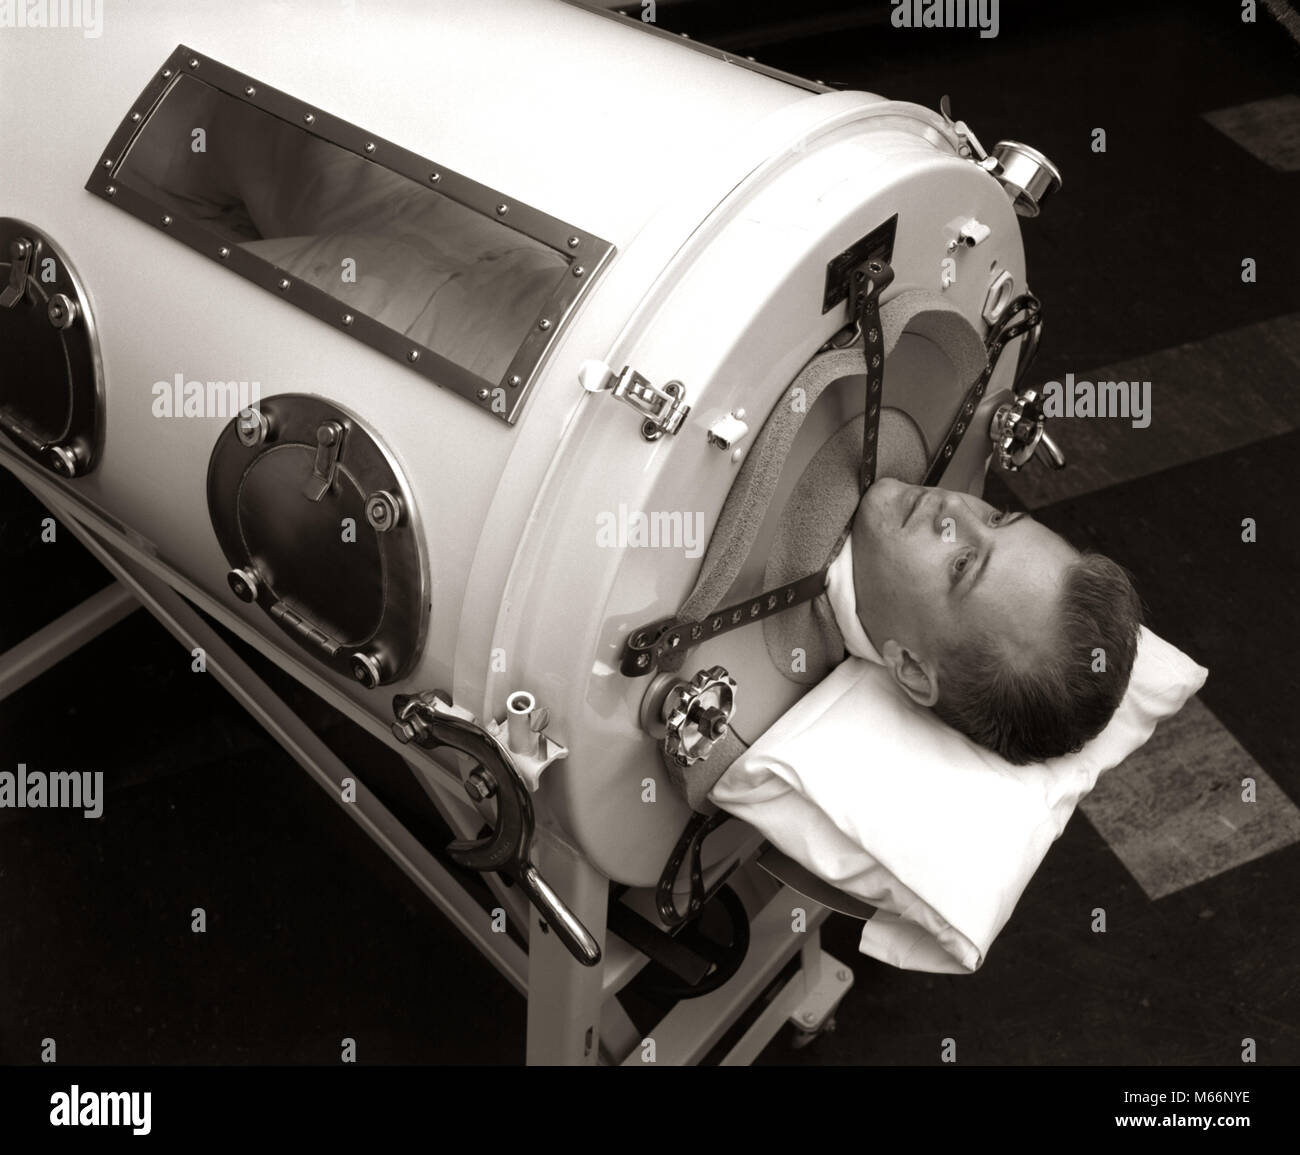 1930s 1940s 1950s MAN LYING IN IRON LUNG NEGATIVE PRESSURE VENTILATOR ARTIFICIAL BREATHING MACHINE - m6513 HAR001 HARS CARING RISK INDOORS PROFESSION CONFIDENCE NOSTALGIA SADNESS HEALTHCARE HISTORIC SINGLE OBJECT OCCUPATION WELLNESS HEAD AND SHOULDERS BREATHING PROTECTION COURAGE OCCASION HEALTH CARE SUPPORT GOOD HEALTH ESCAPE HOSPITALS FACILITY FACILITIES POLIO POLIOMYELITIS RESPIRATORY RESPIRATORY DISEASE LAY MALES MID-ADULT MID-ADULT MAN ARTIFICIAL B&W BLACK AND WHITE CAUCASIAN ETHNICITY DISEASE FERROUS METAL HOSPITALIZATION IRON LUNG LUNG MECHANICAL RESPIRATOR NEGATIVE PRESSURE VENTILATOR Stock Photo